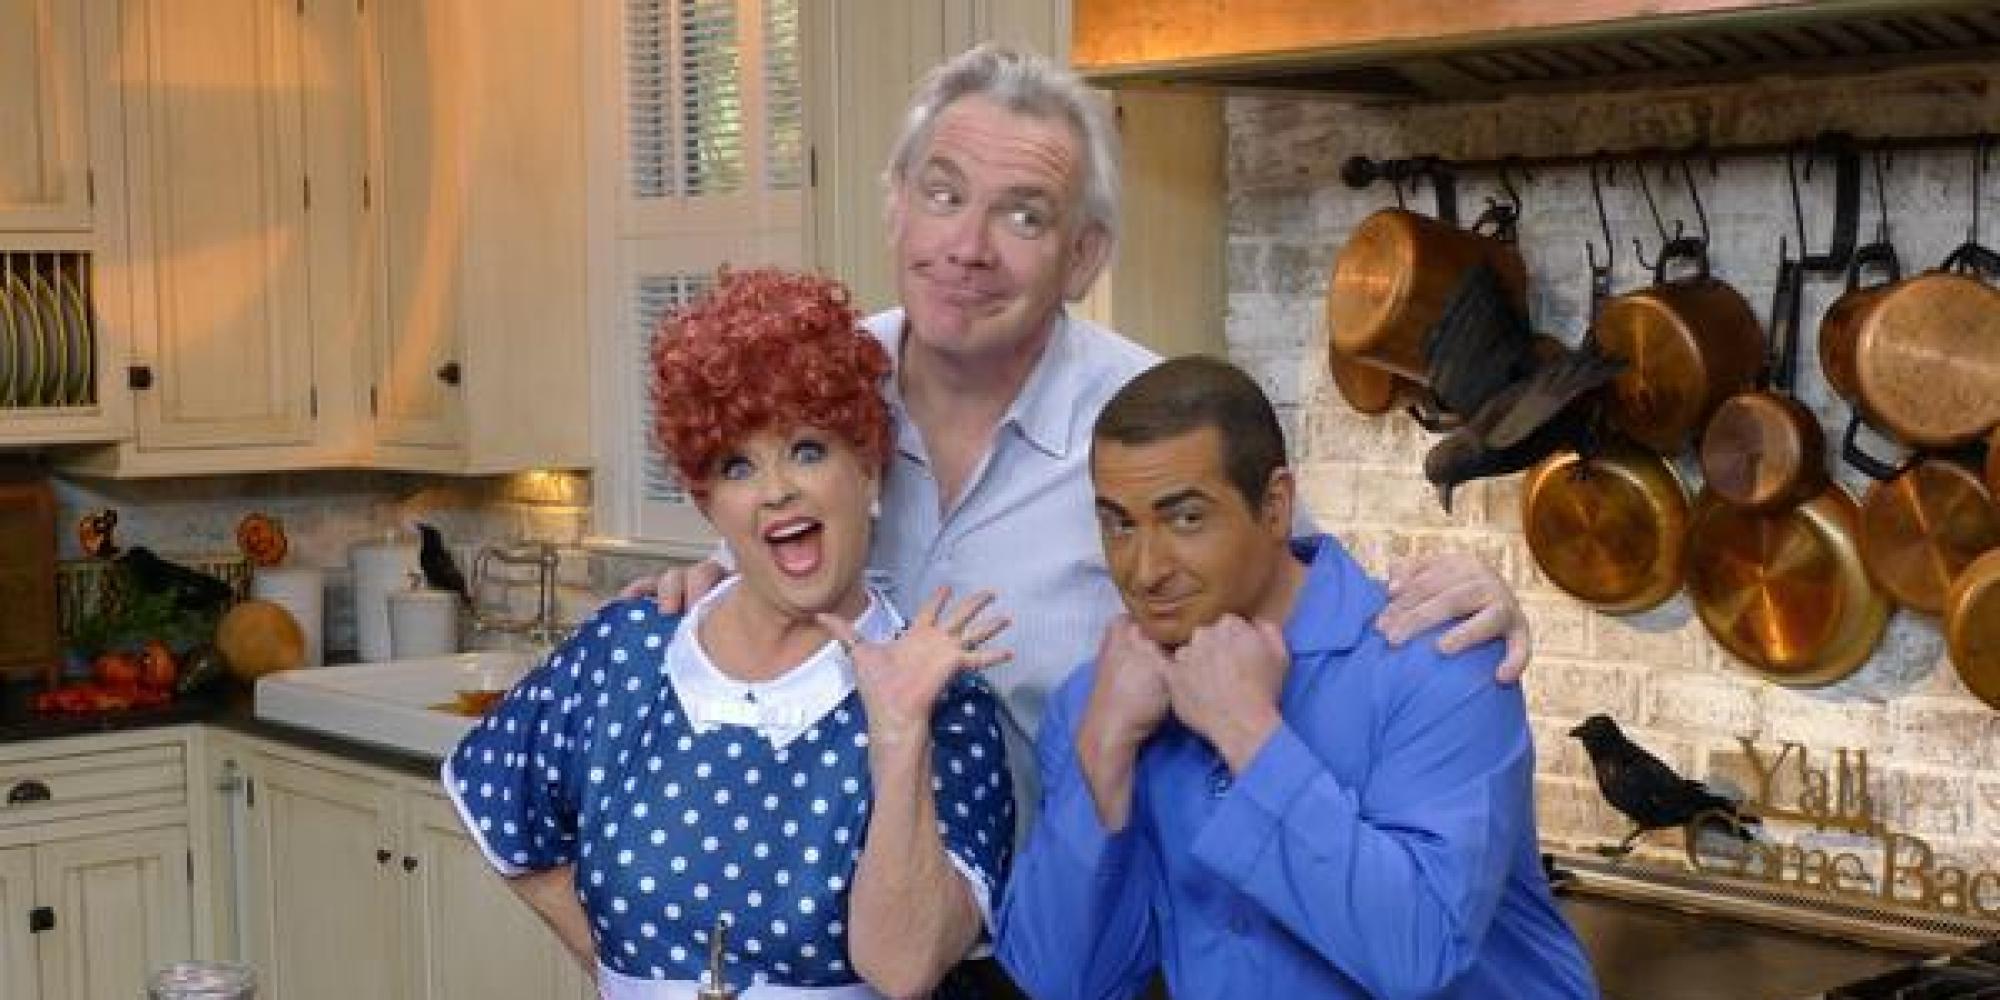 Paula Deen Tweets Photo With Son In 'Brownface,' Controversy Ensues